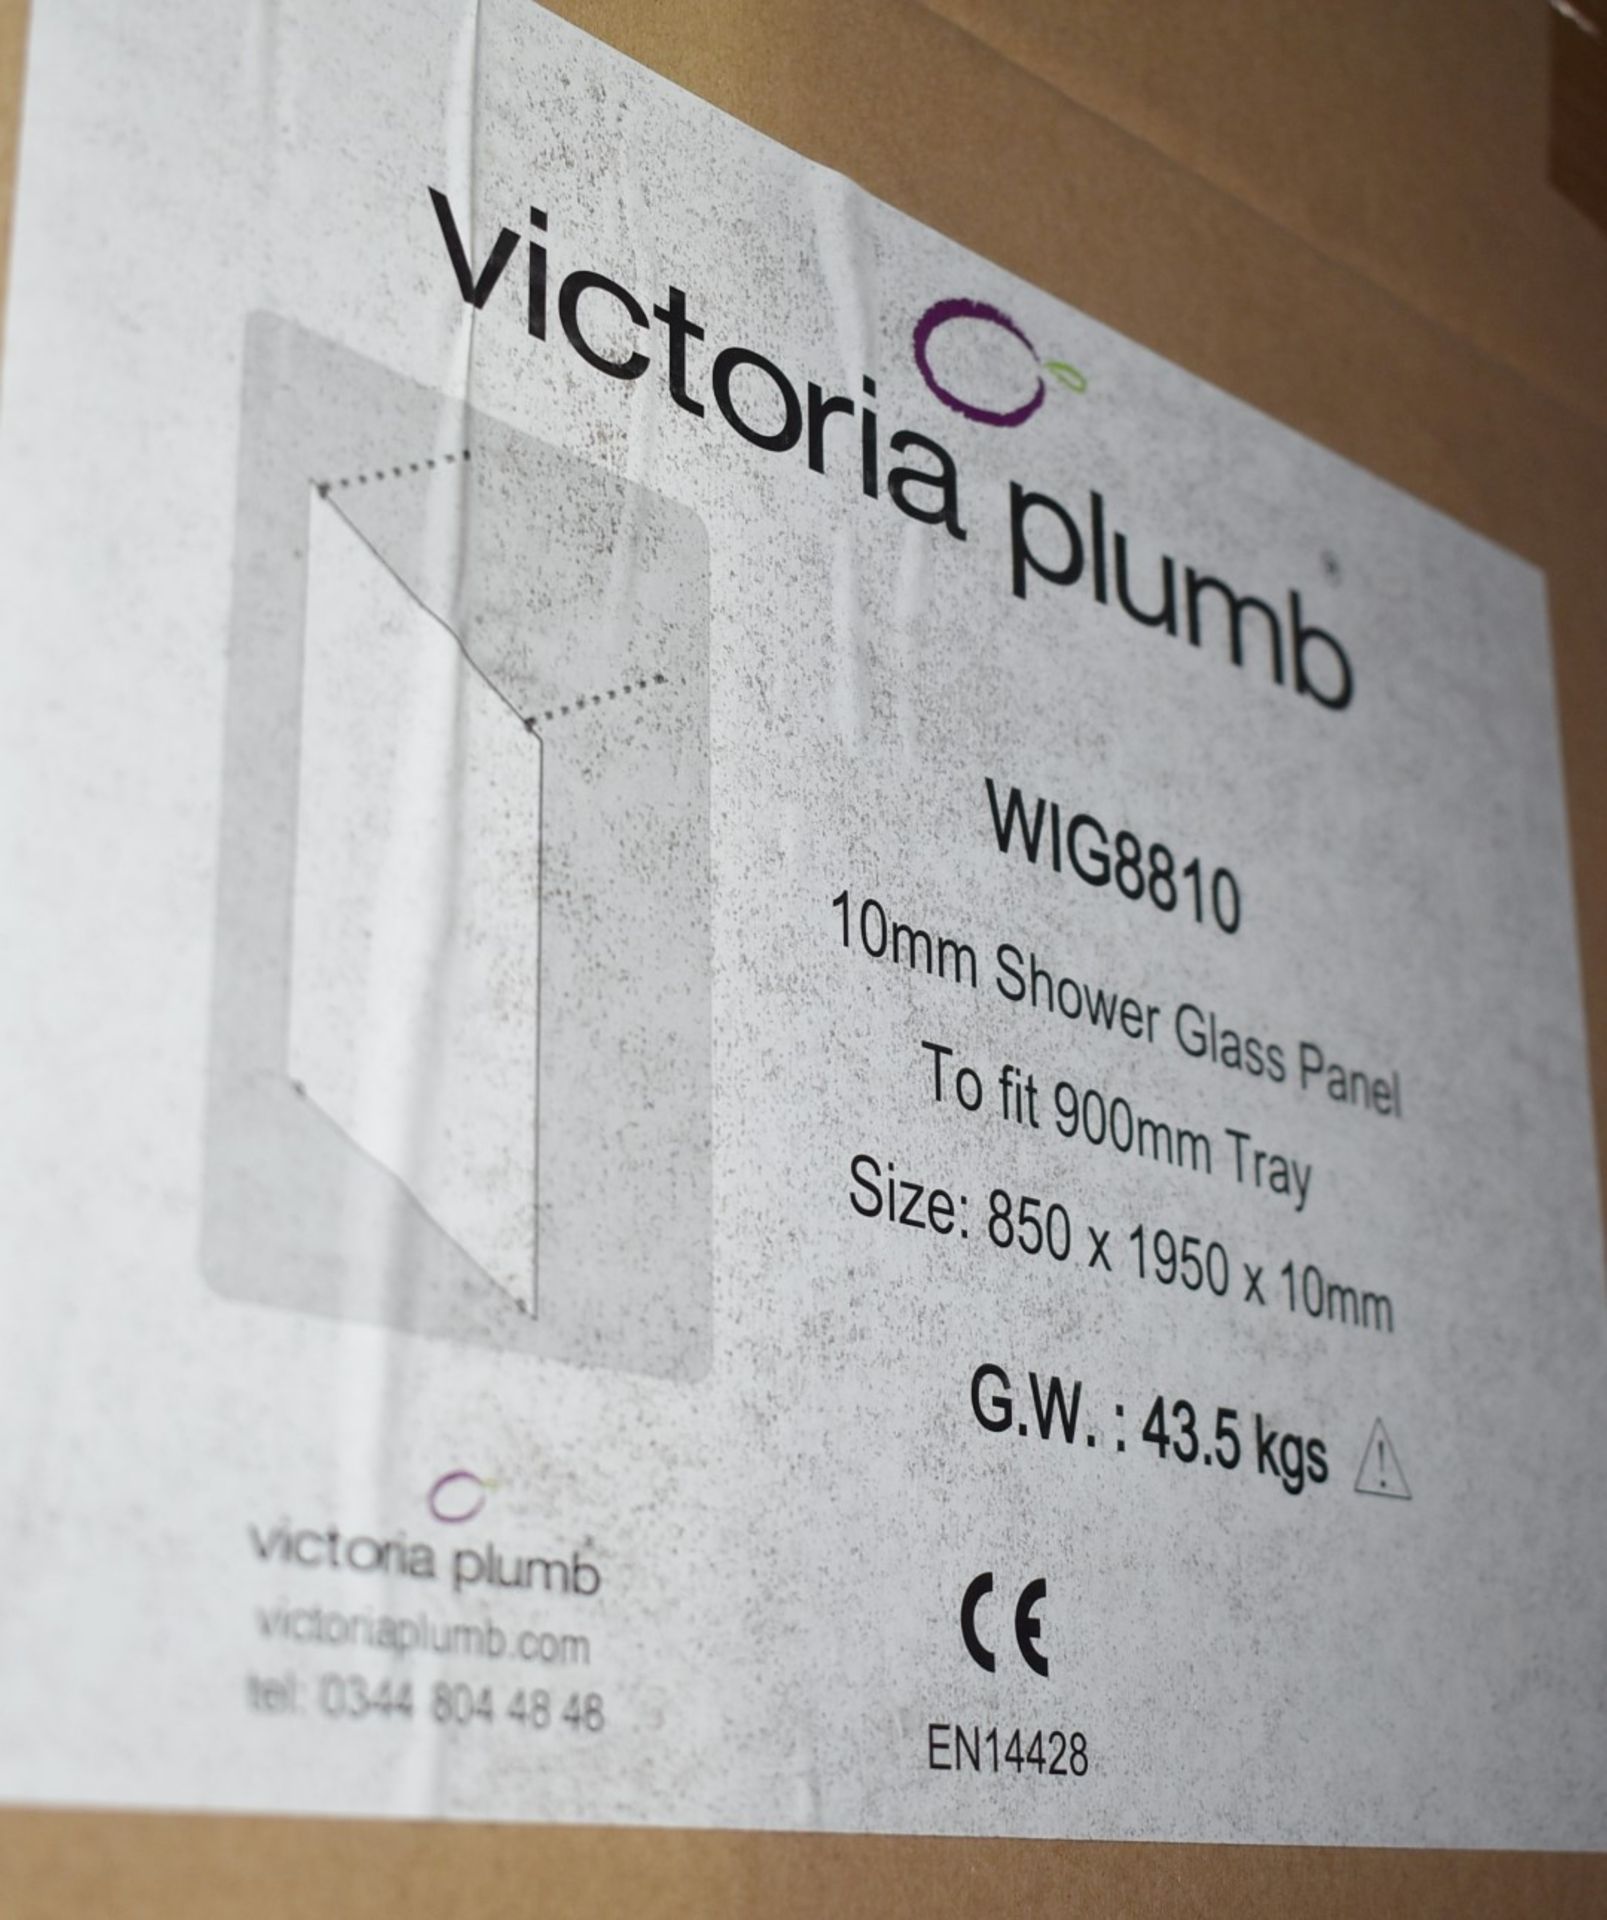 1 x Victoria Plum 850 x 1950mm Shower Glass Panel to Fitt 900mm Tray - 10mm Thickness - Type WIG8810